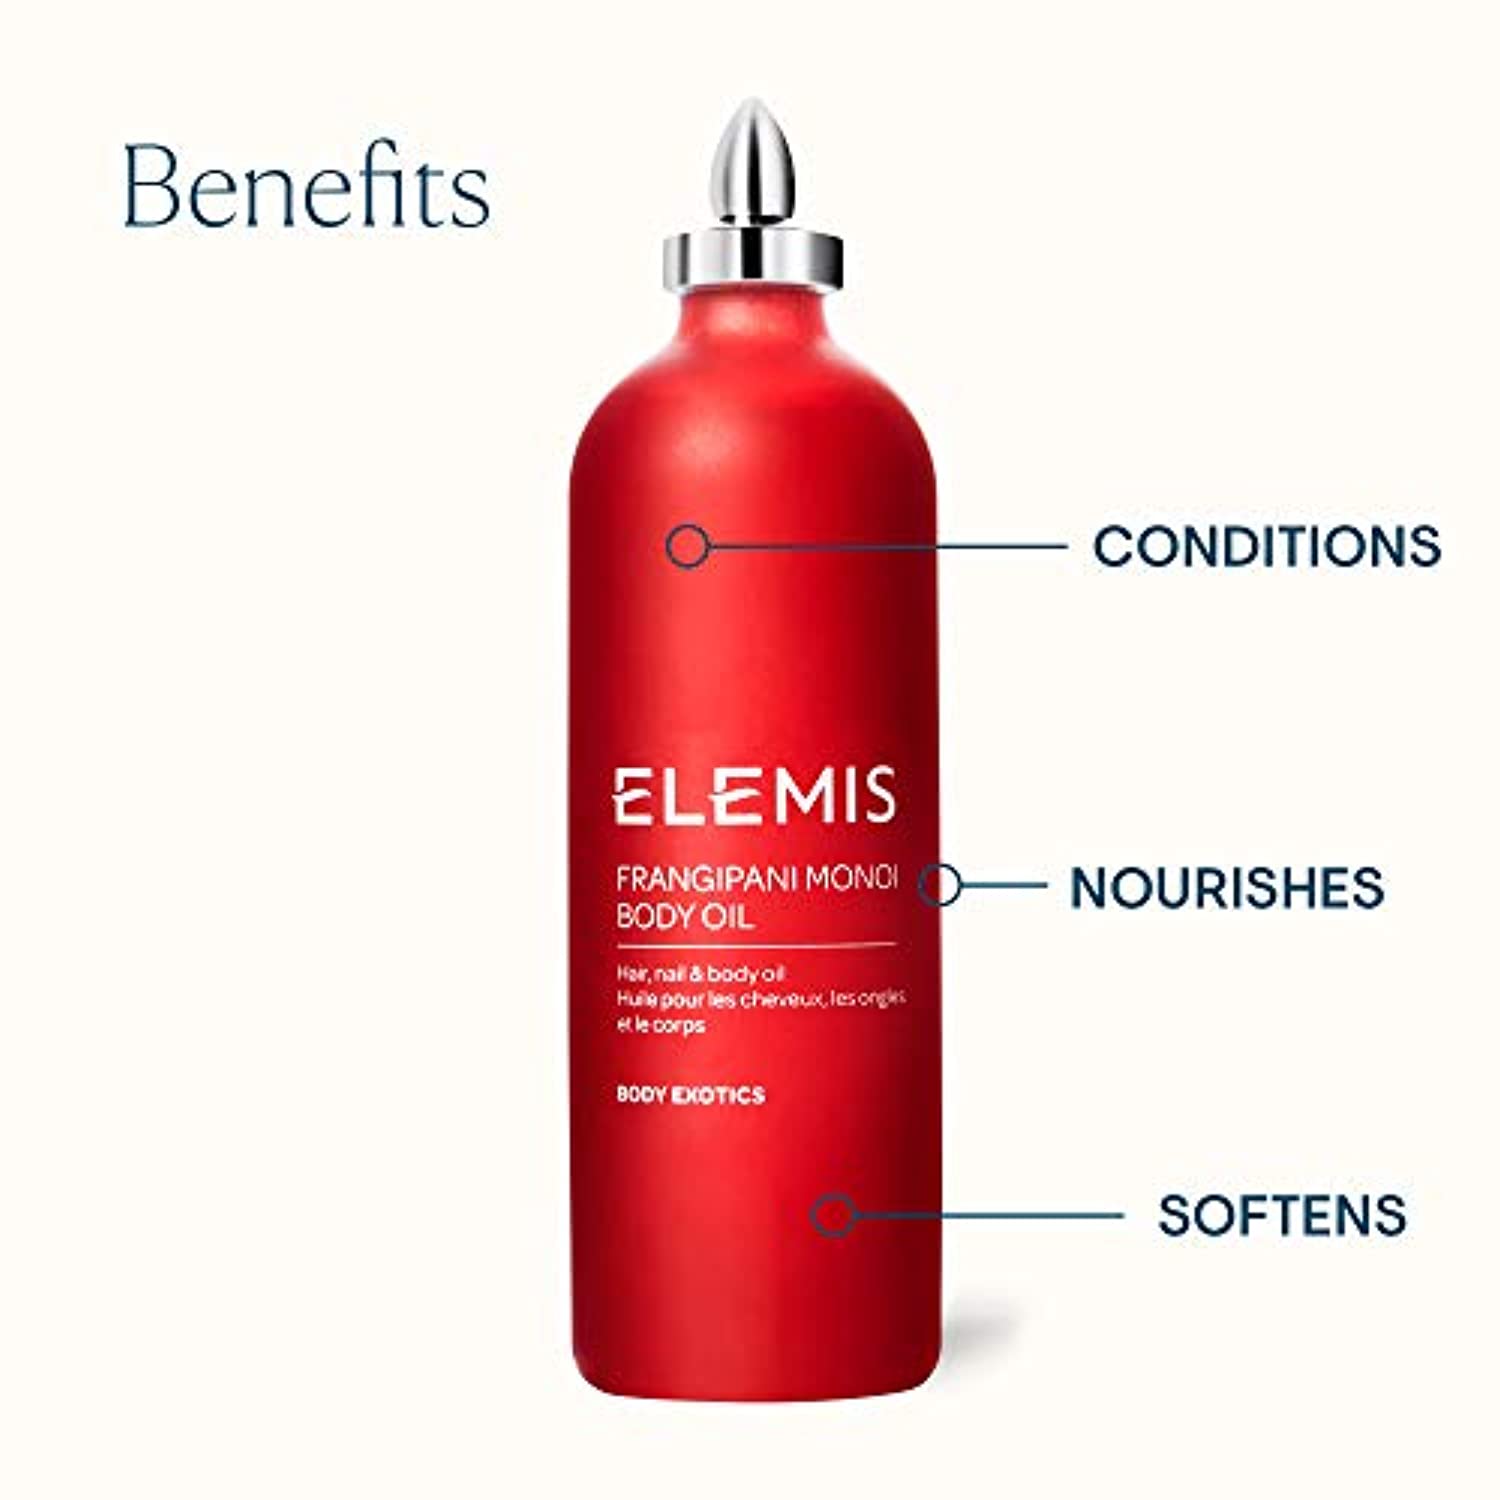 ELEMIS Frangipani Monoi Body Oil | Luxurious, Ultra-Hydrating Body Oil Deeply Nourishes, Conditions, and Softens Hair, Skin, and Nails | 100 mL